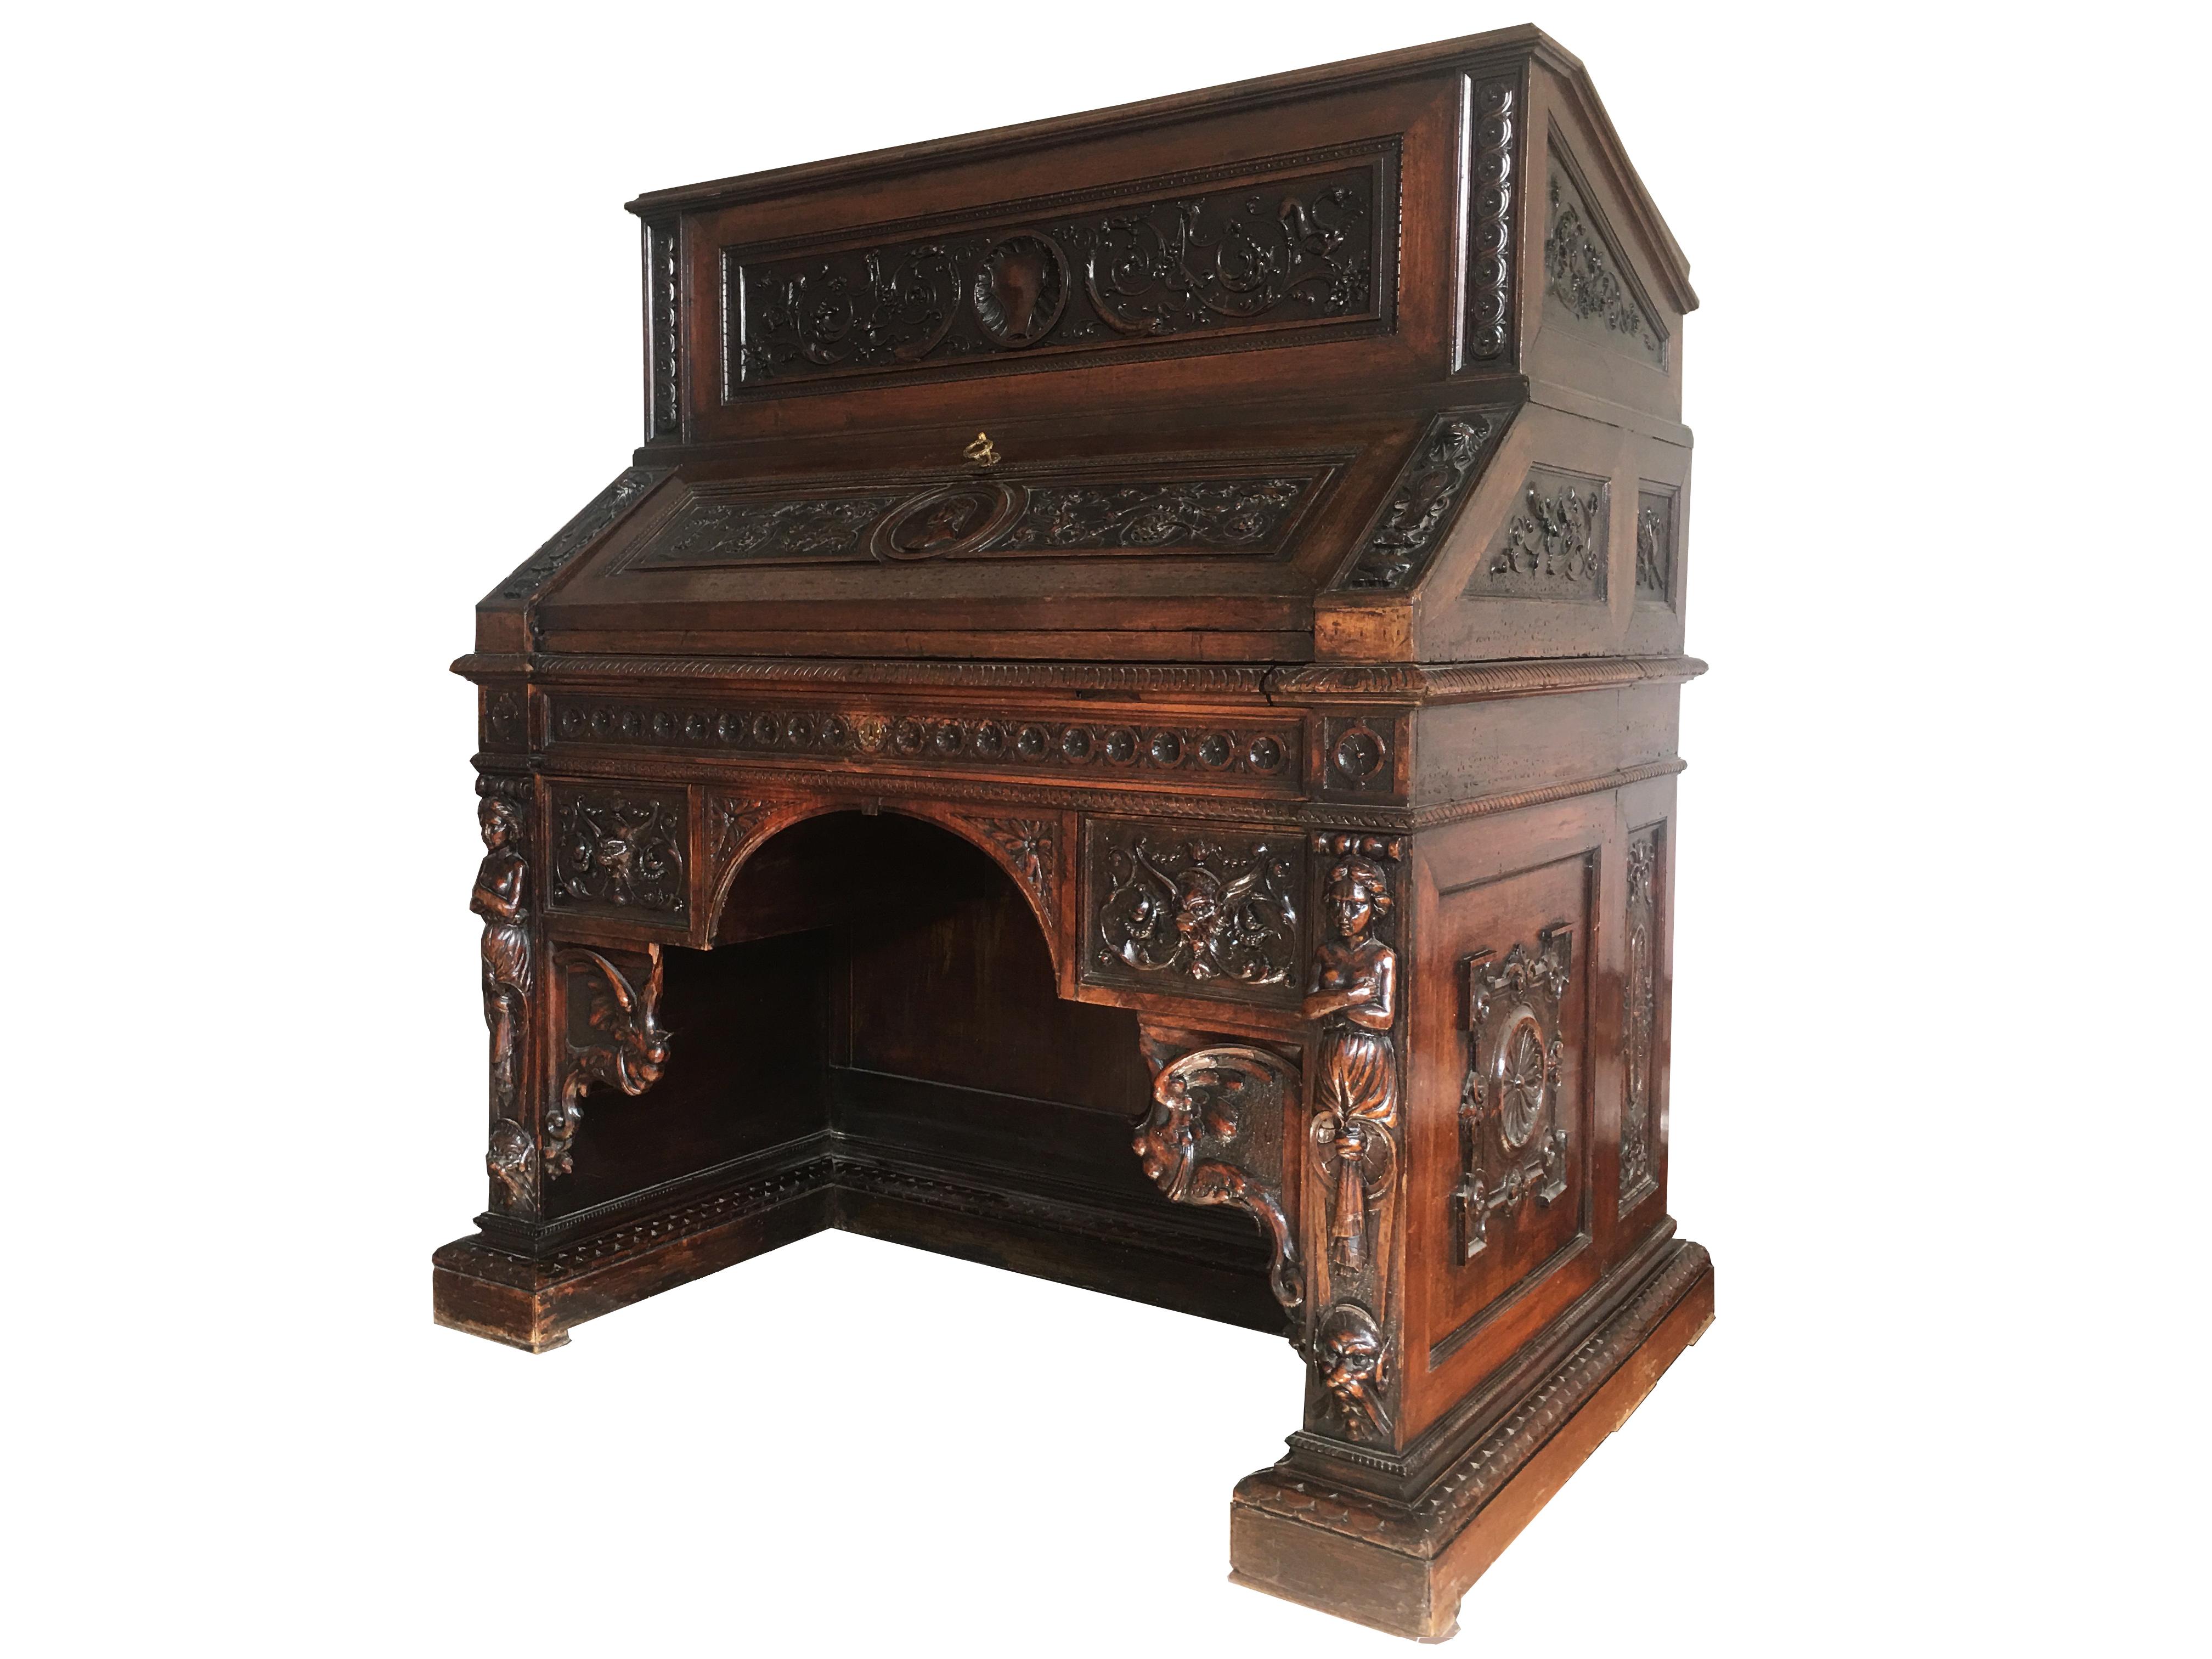 Piece of extreme beauty. It belonged to a famous scholar of Dante Alighieri. On one side desk, above the lectern, behind wardrobe with two pullers. 
Very fine inlays in almost all surfaces of the furniture.